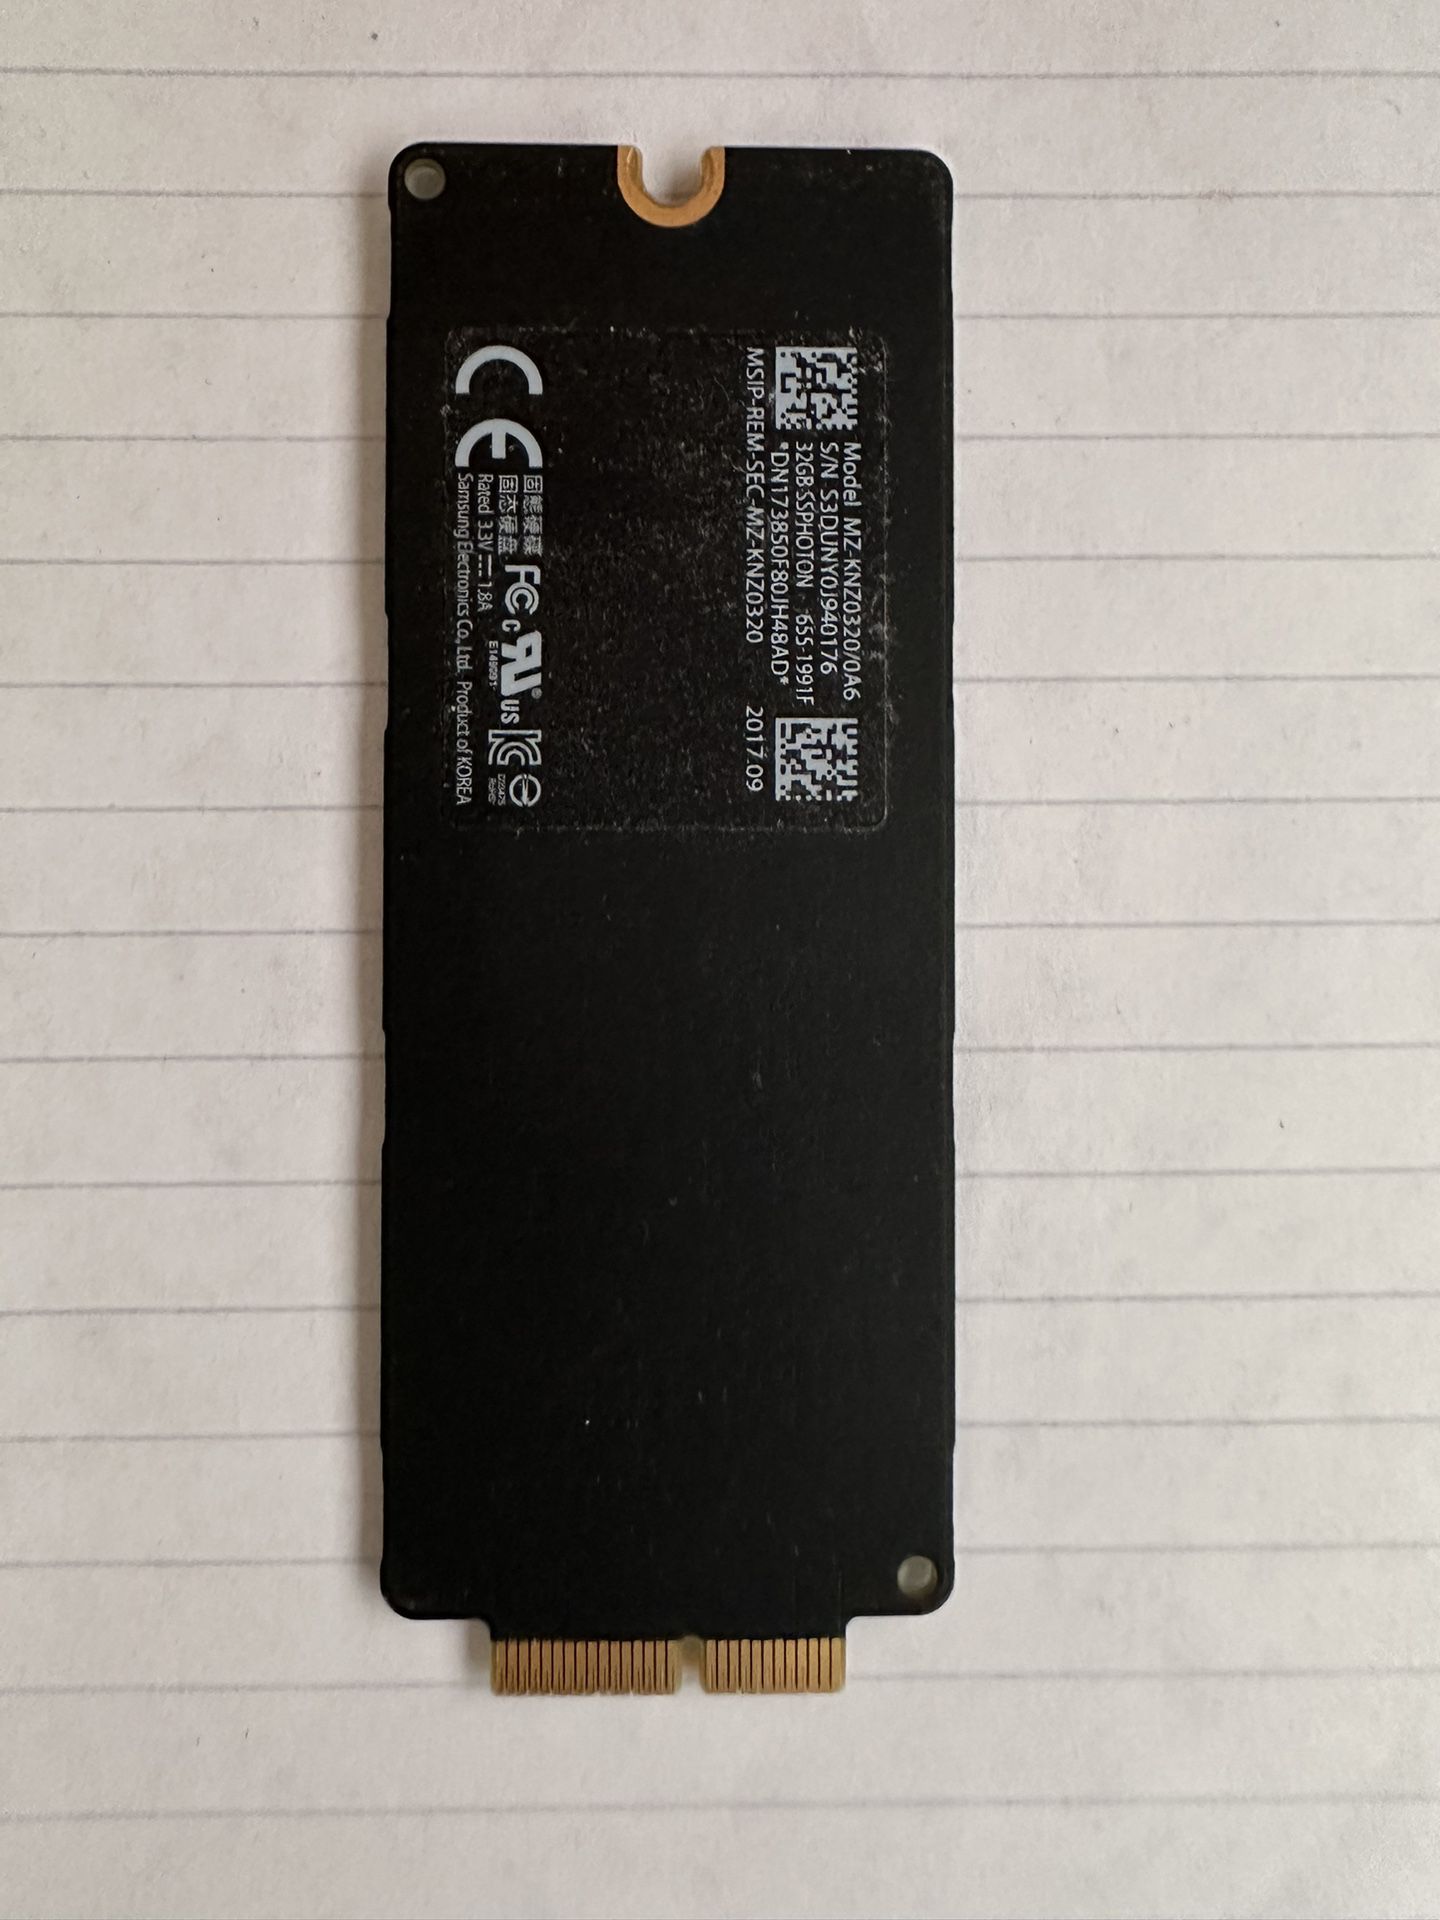 Samsung 32 GB SSD From iMac Computer